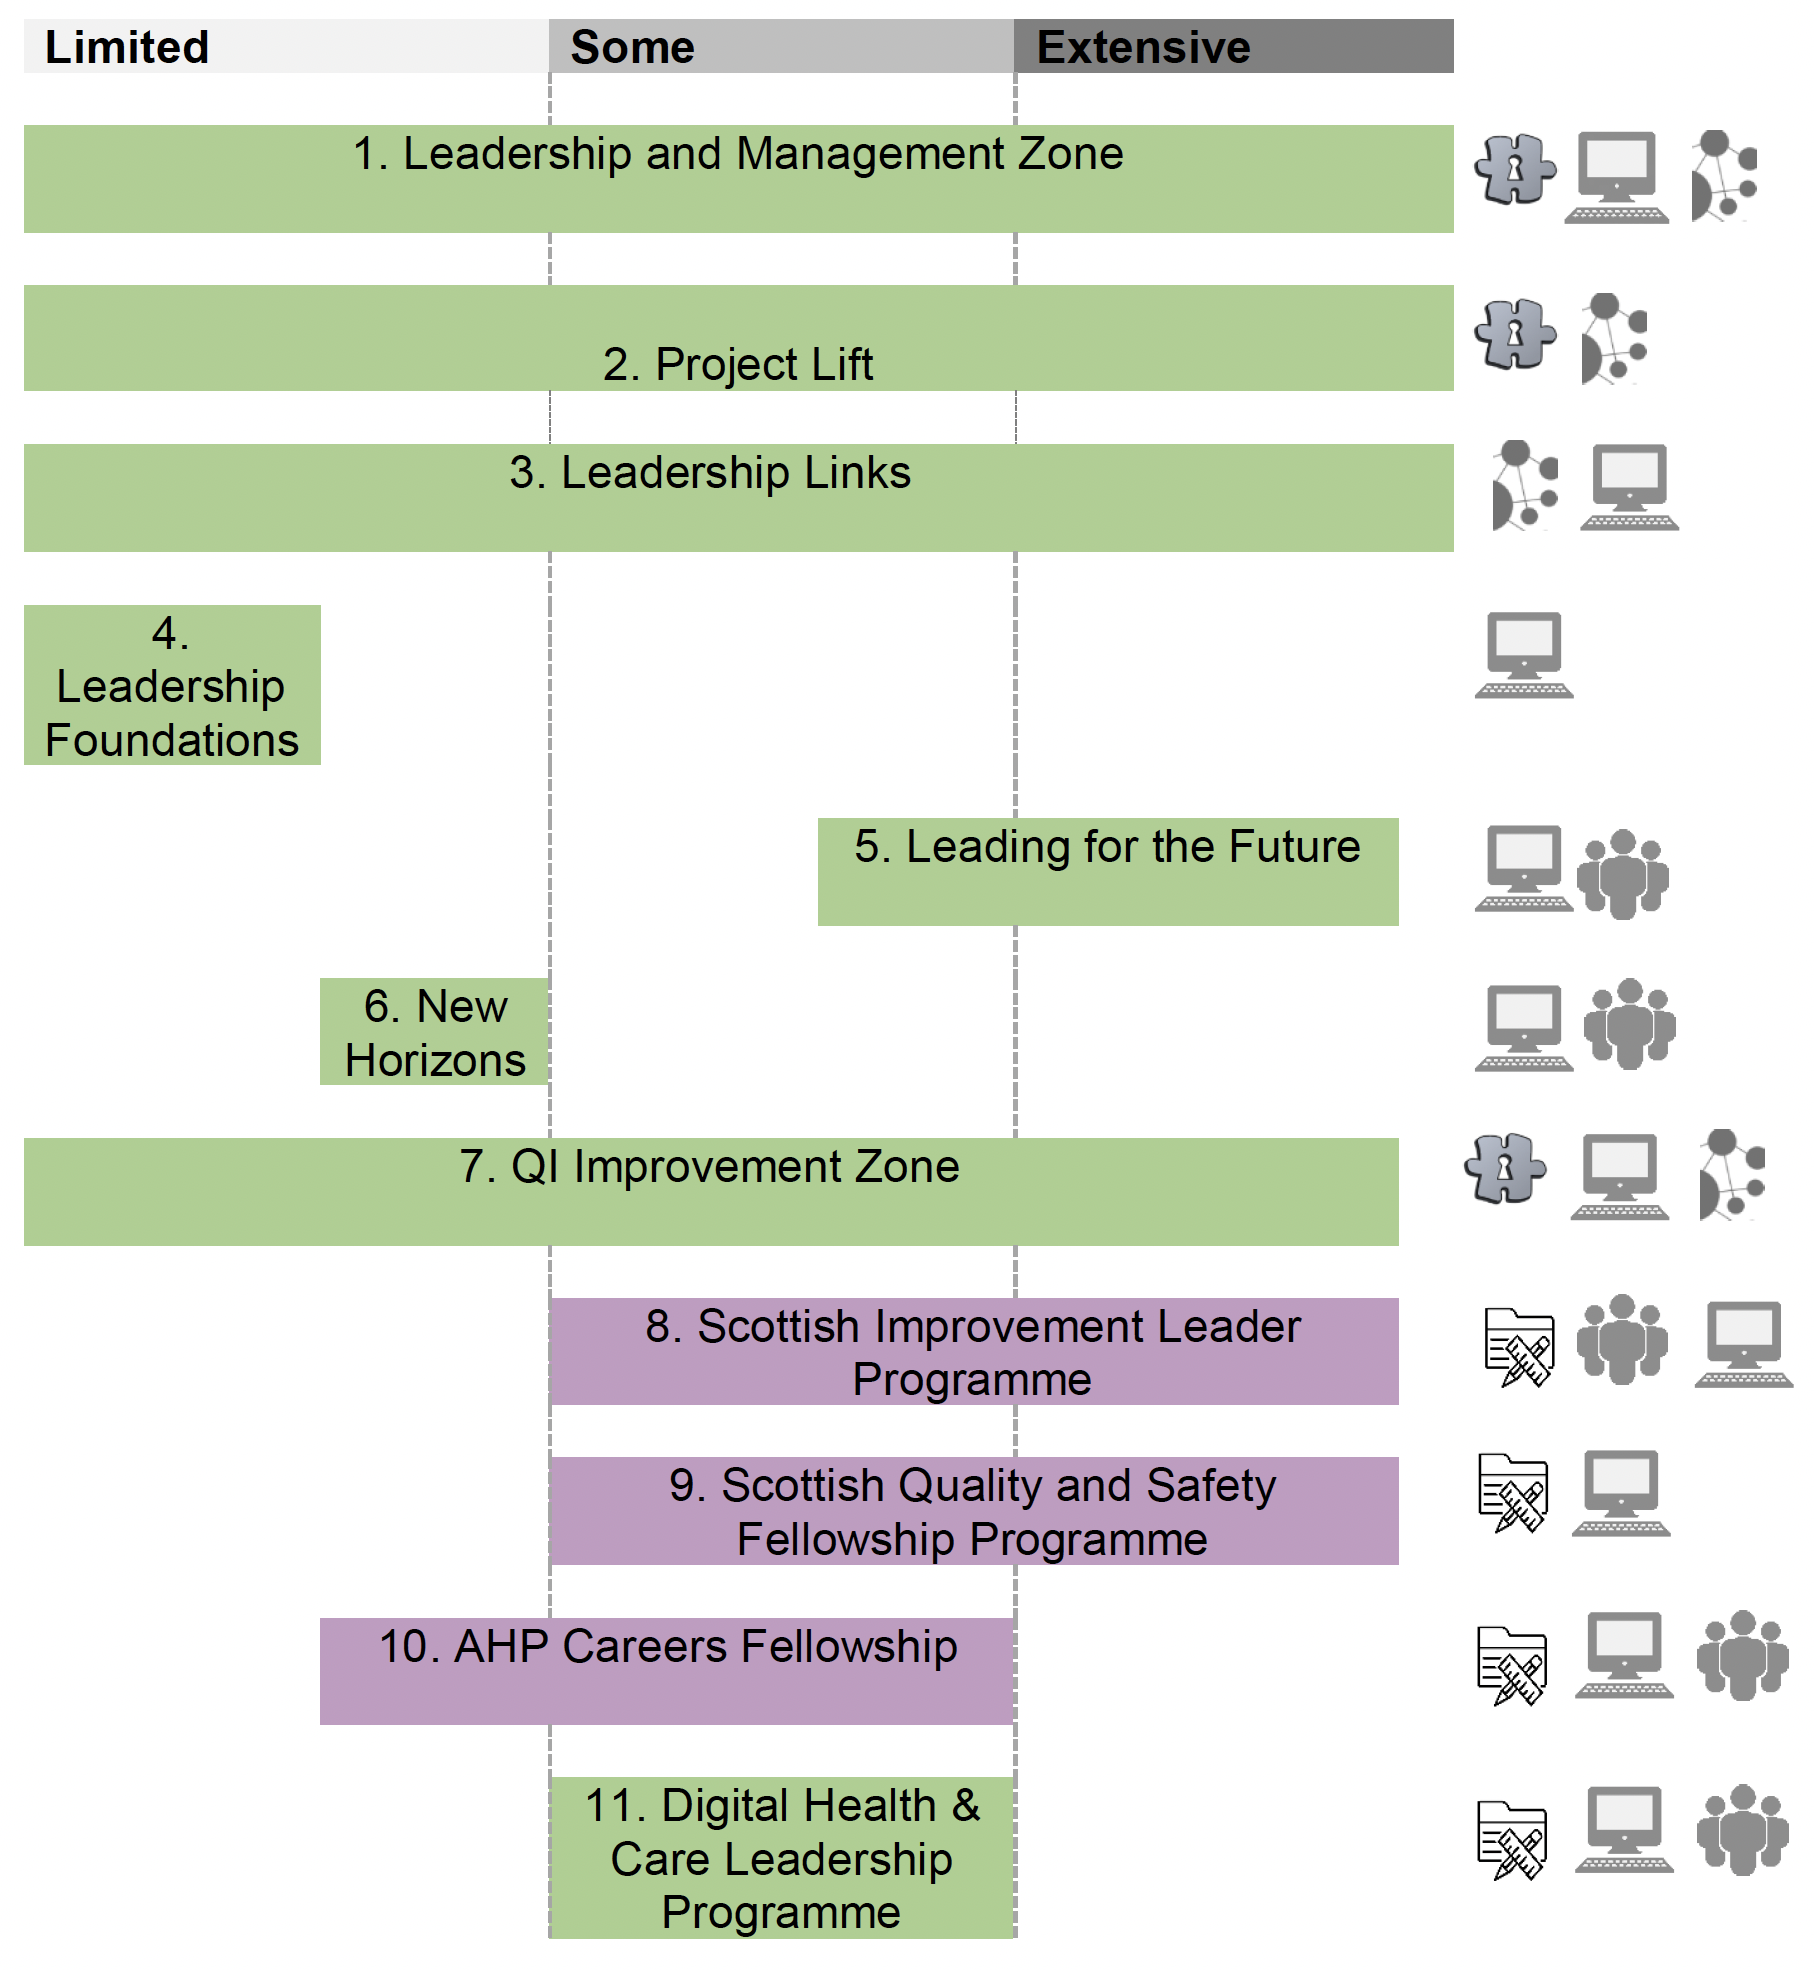 Diagram 4 provides an overview of the leadership development content that is covered in more detail in table 2 on the following page. 
Each learning bar illustrated in the form of bars set out horizontally one under the other and numbered from 1 to 12. 
The length of each bar and where it is positioned correlates to the axis running along the top which relates to the level of existing leadership experience individuals have. 
Bar 1 ‘leadership and management zone’, bar 2 ‘project lift’, bar 3 ‘leadership links’ and bar 7 ‘QI improvement zone’ run the length of the axis denoting that they are for people with all levels of existing leadership experience.
Bar 4 ‘leadership foundations’ is situated towards the far left indicating it is for those with limited leadership experience.
Bar 6 ‘New Horizons’ is situated to the right of bar 4 but still within the segment of the axis denoting limited leadership experience.
Bar 5 ‘Leading for the future’ straddles the some and extensive experience categories though is proportionately more towards the extensive end.
Bar 8 ‘Scottish Improvement Leader Programme’ and bar 9 ‘Scottish Quality and Safety Fellowship programme’ both straddle the some and extensive experience categories equally. 
Bar 10 ‘AHP Careers Fellowship’ is positioned so that it encompasses a part of the limited experience section of the axis and all of the some experience section.
Bar 11 ‘Digital Health and Care Leadership Programme’ occupies only the central third of the axis denoting that it is targeted towards those with some previous leadership experience. 
The bars are also coloured either green to denote that they are targeted towards health and social care colleagues generally or coloured purple to denote they are targeted towards colleagues with specific specialisms/ expertise. 
Adjacent to each bar is an infographic denoting the type of learning each one includes. There is a puzzle piece with a key outline in the middle to signify a gateway, there is an icon with different sized circles interconnected by lines to signify a network, there is a computer icon to deonte online content/ course, there is a folder with pencil and ruler to denote options with a project component and there is an icon with three figures to denote a group component. 
Bar one is coloured green and has the gateway, computer and network icons.
Bar two is coloured green and has the gateway and network icons.
Bar three is coloured green and has the network and computer icons.
Bar 4 is coloured green and has the computer icon.
Bar 5 is coloured green and has the computer and group icons.
Bar 6 is coloured green and has the computer and group icons.
Bar 7 is coloured green and has the gateway, computer and network icons.
Bar 8 is coloured purple and has the project, group and computer icons.
Bar 9 is coloured purple and has the project and computer icons.
Bar 10 is coloured purple and has the project, computer and group icons.
Bar 11 is coloured green and has the project computer and group icons. 
